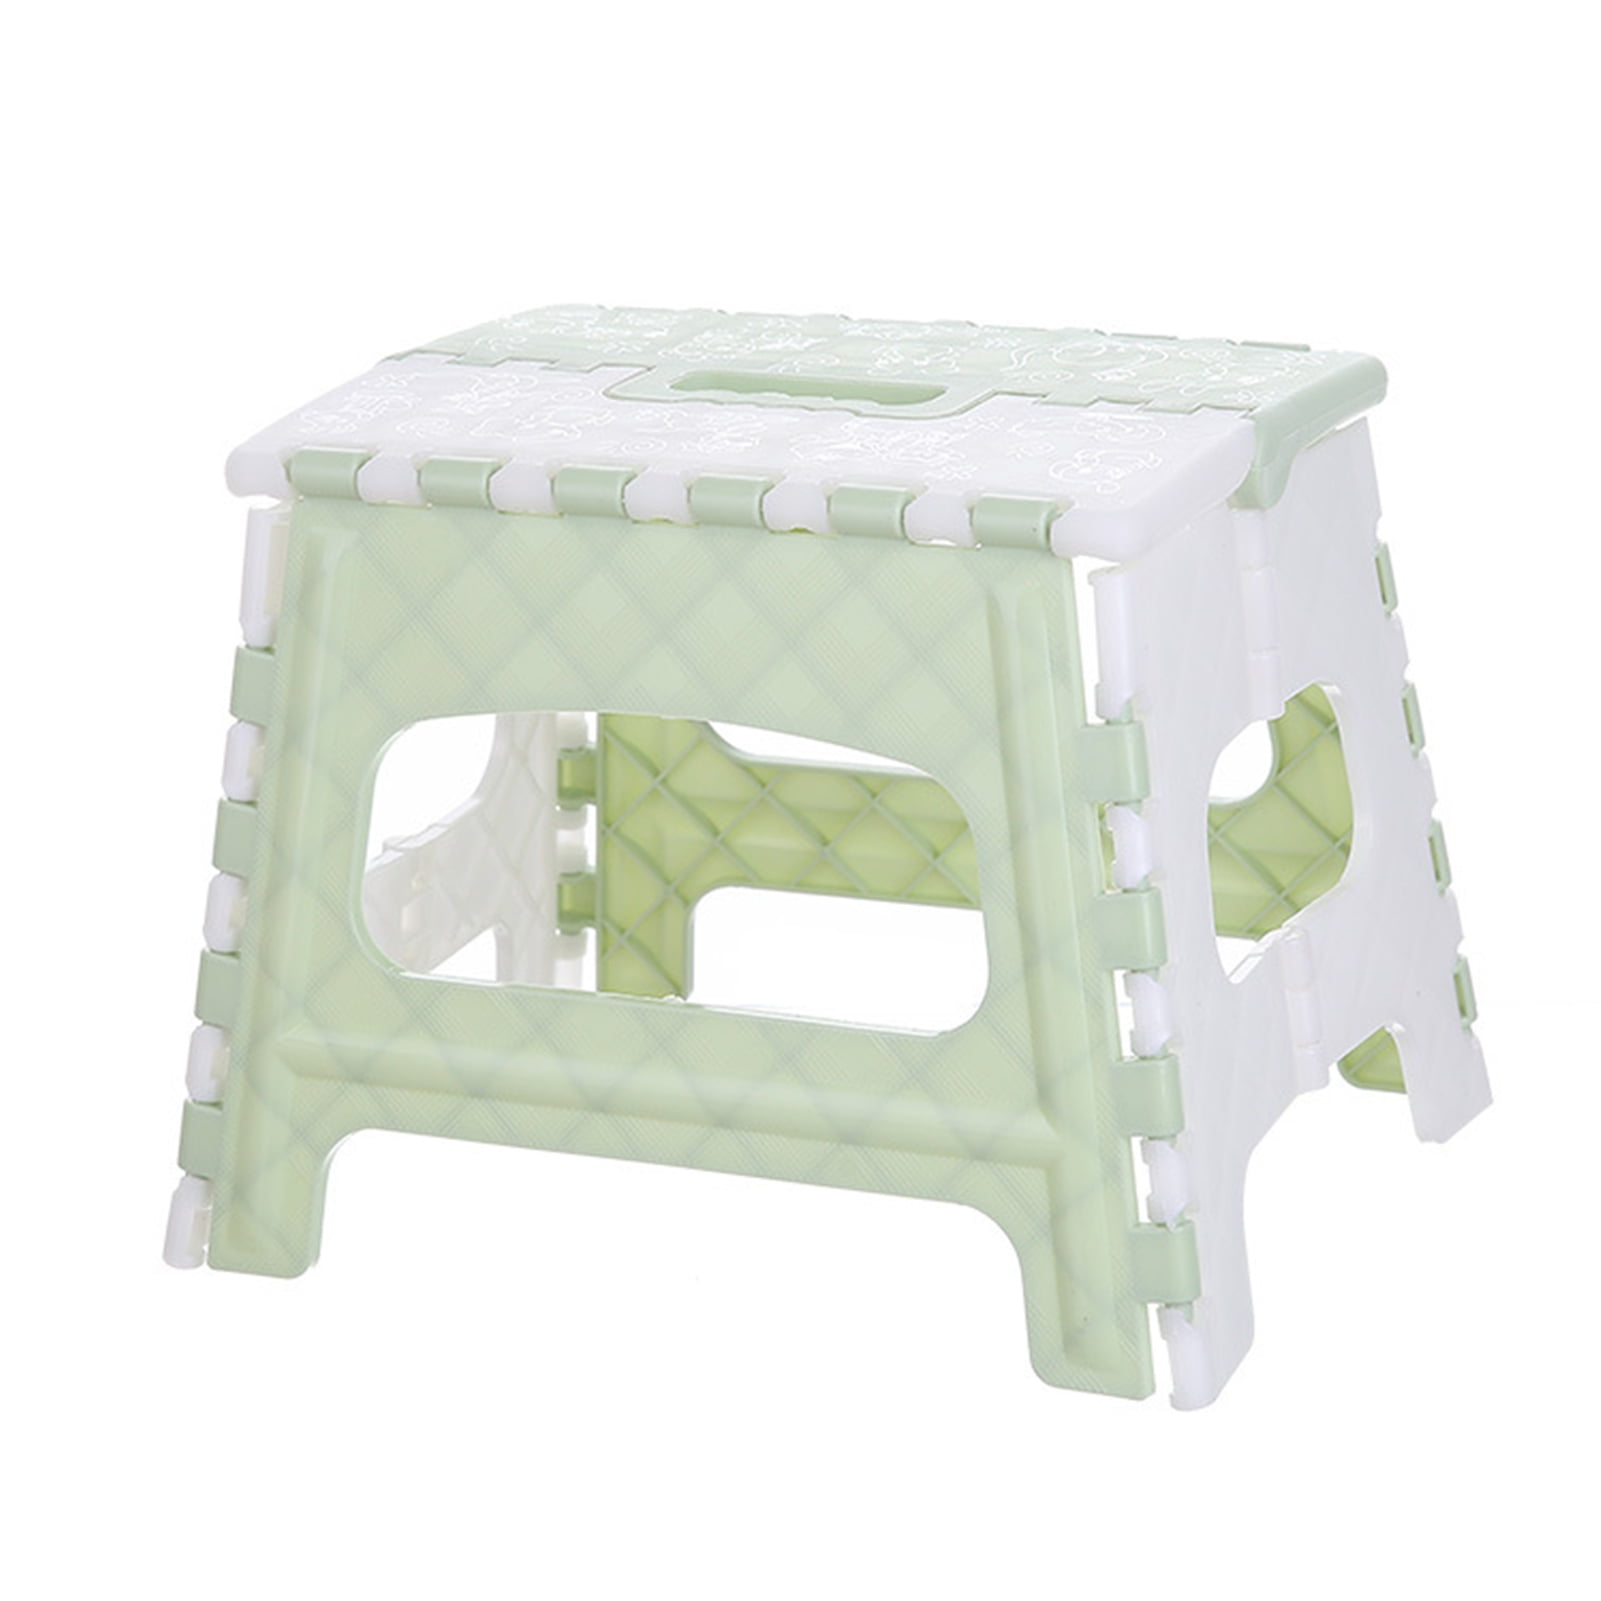 Details about   Large 150KG Folding Step Stool Multi Purpose Heavy Duty Home Kitchen Foldable RD 